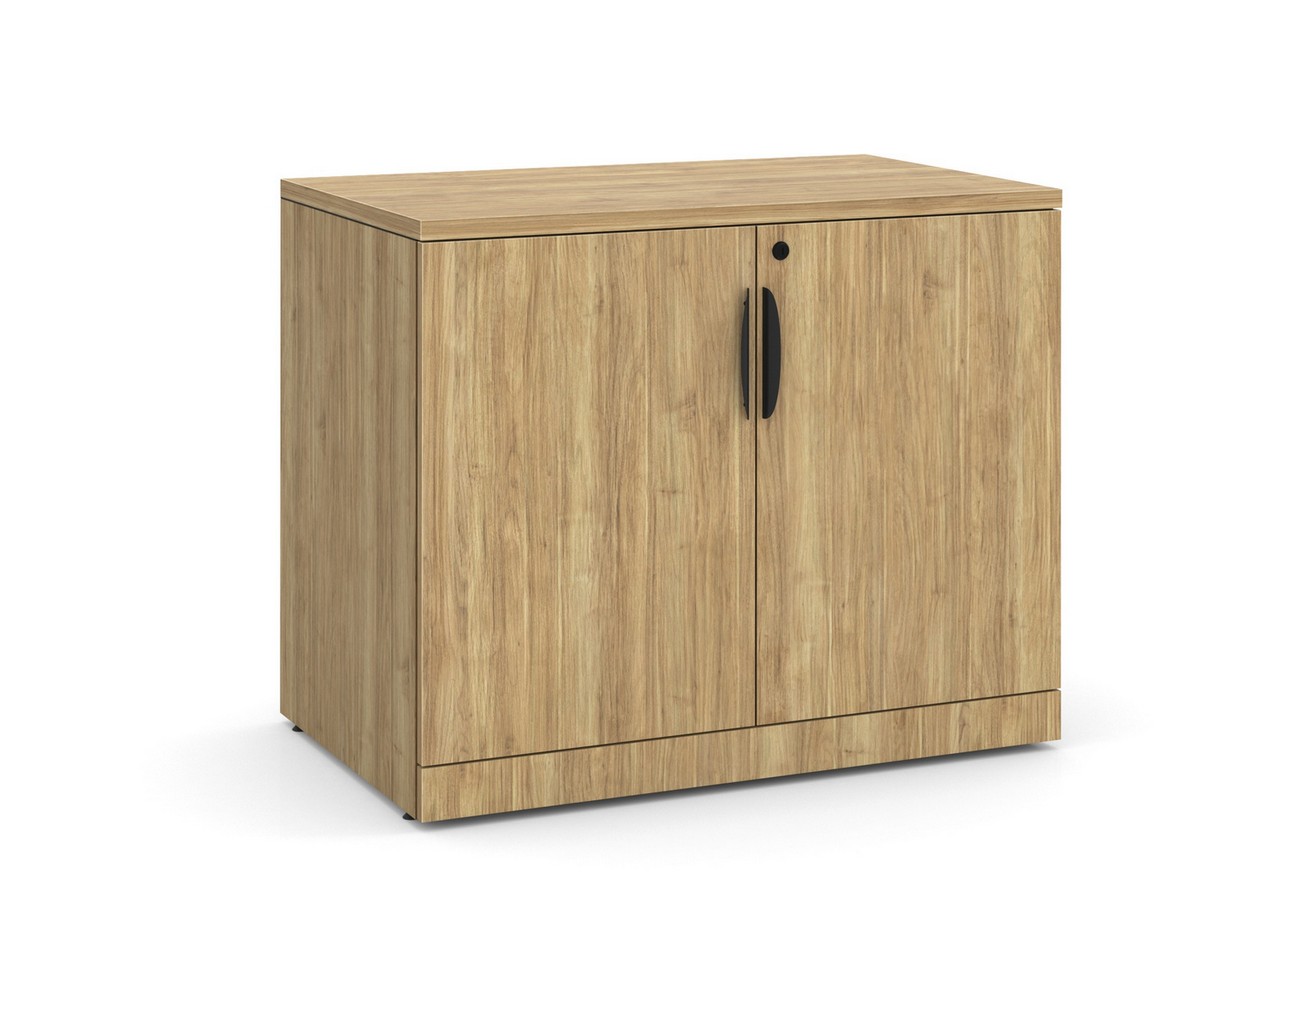 Locking Double Door Storage Cabinet 29.5 Inch with Aspen Finish